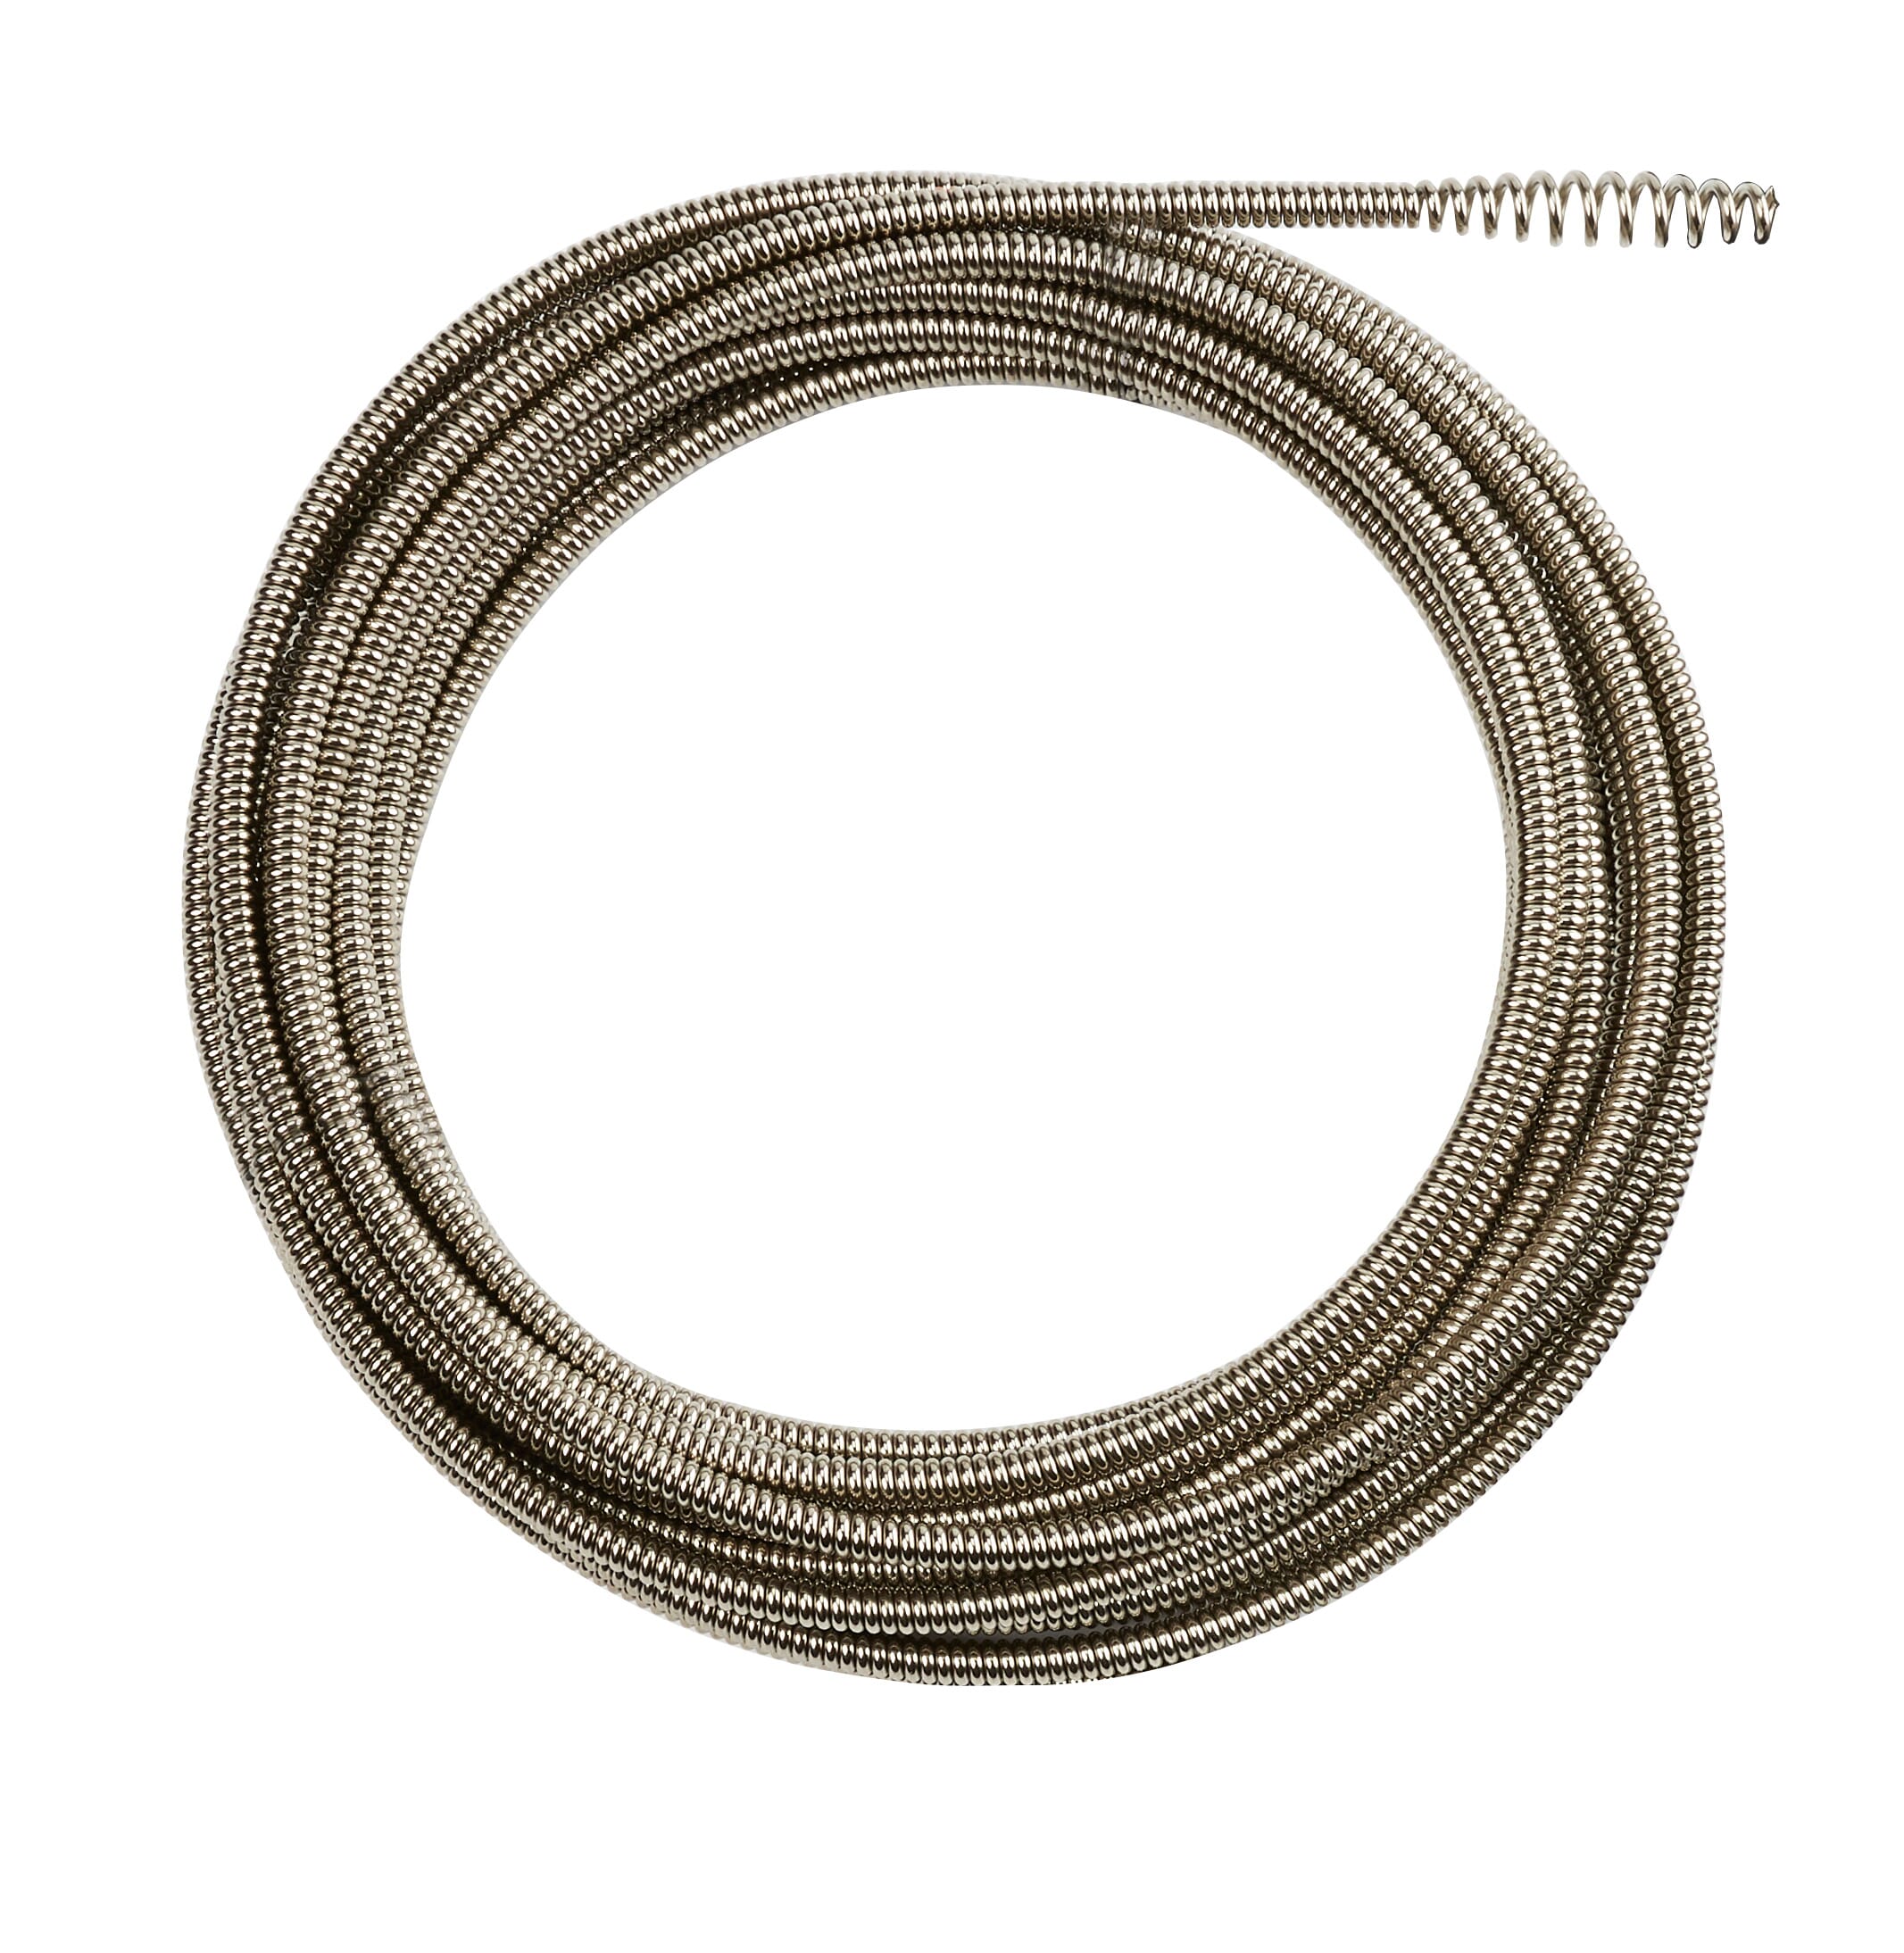 Milwaukee® 48-53-2672 Inner Core Bulb Head Drain Cleaning Cable, 1/4 in, Steel, For Use With Drain Cleaning Machines, 1-1/4 to 2-1/2 in Drain Line